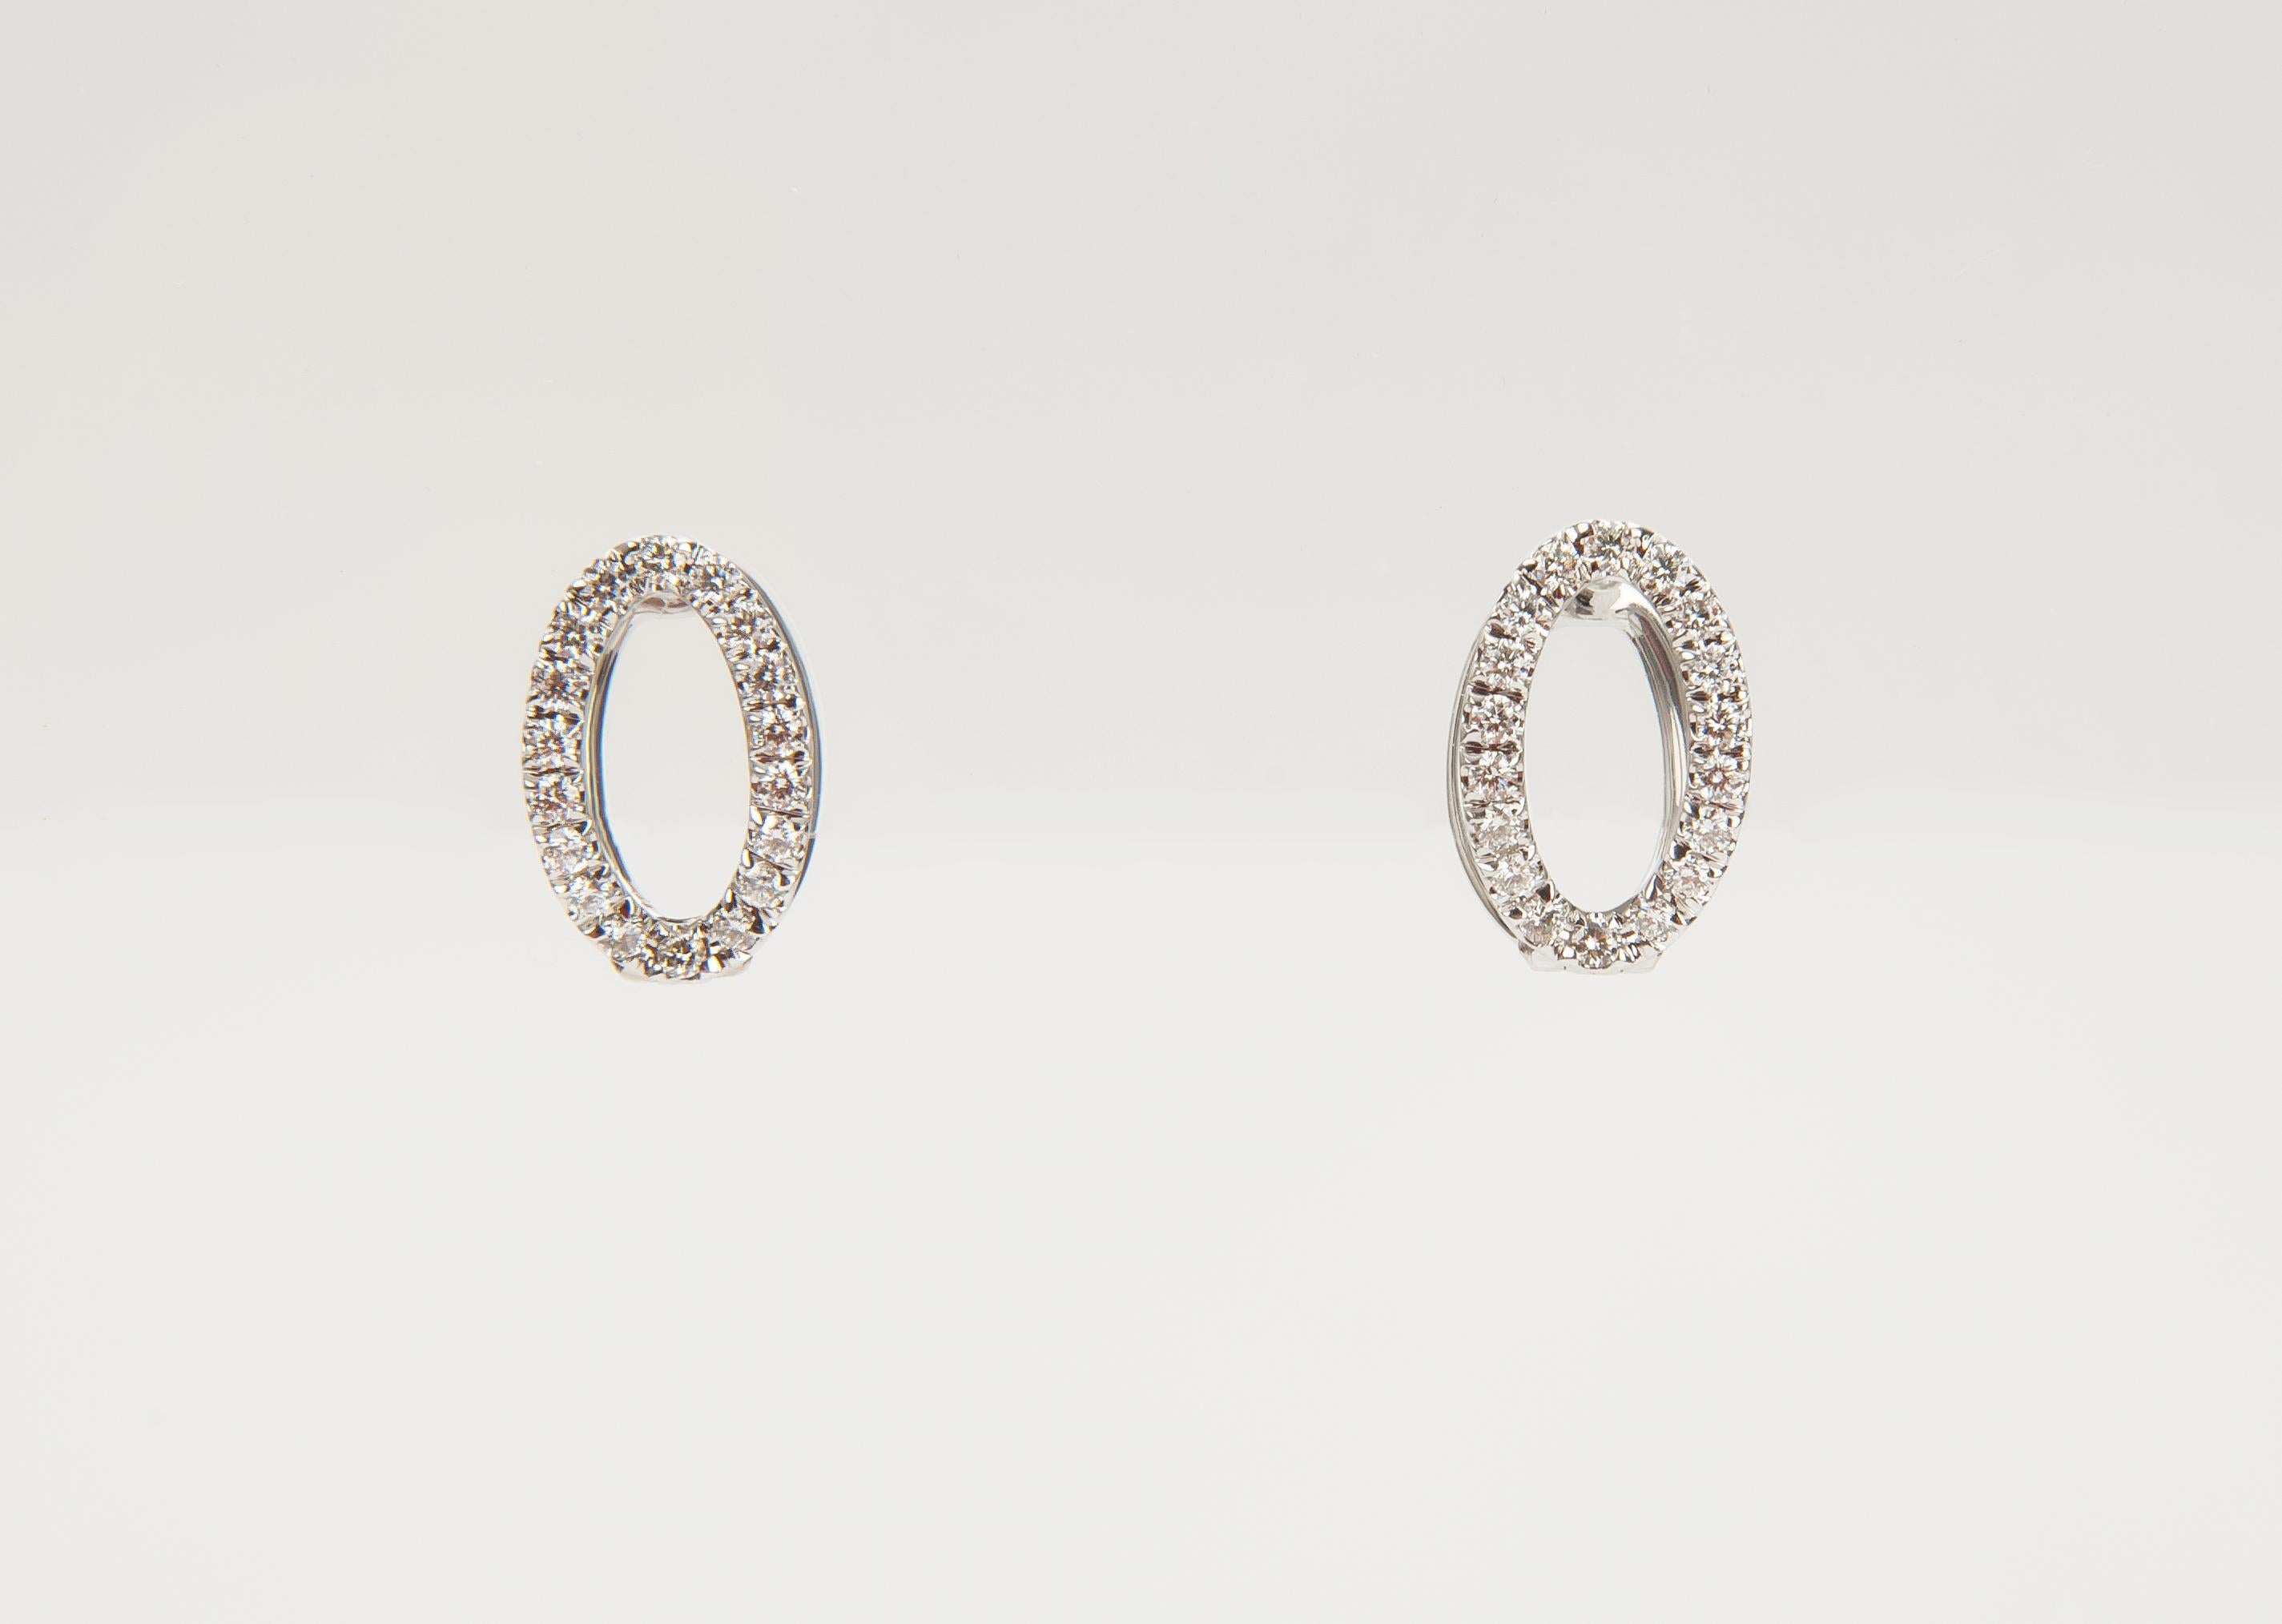 Designed as open ovals, these delicate diamond earrings curve gracefully around your lobe and are scaled to layer with other studs or cuffs.

18K white gold
Pave diamonds (0.53tcw)
Hinged hoop with post back
0.60” long